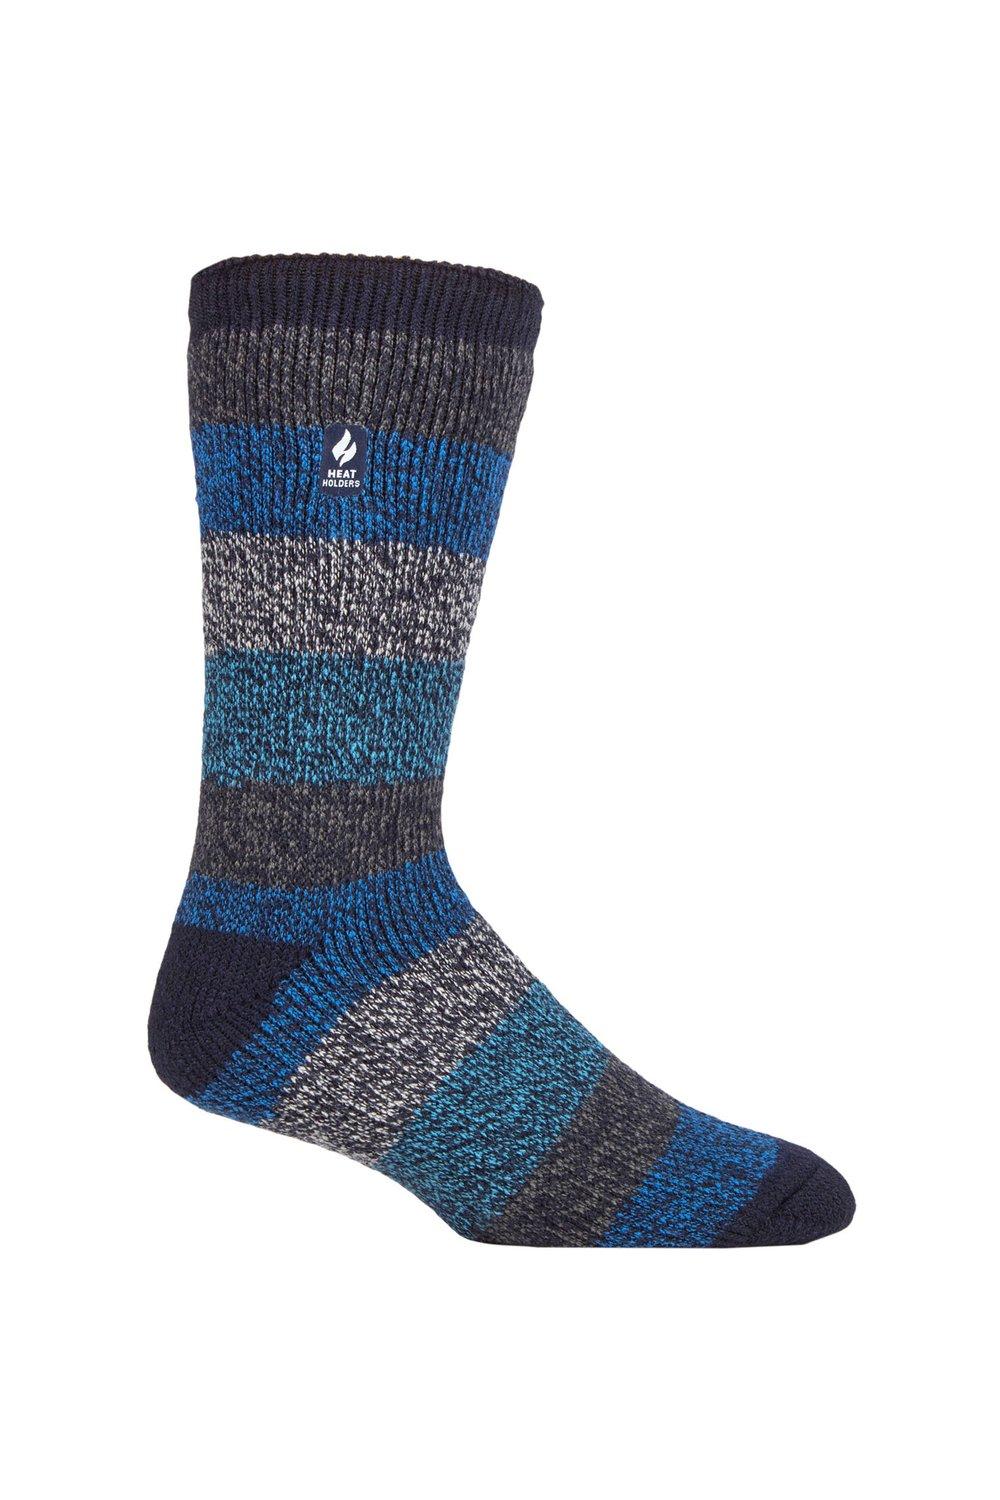 1 Pair 2.3 TOG Patterned and Plain Thermal Socks